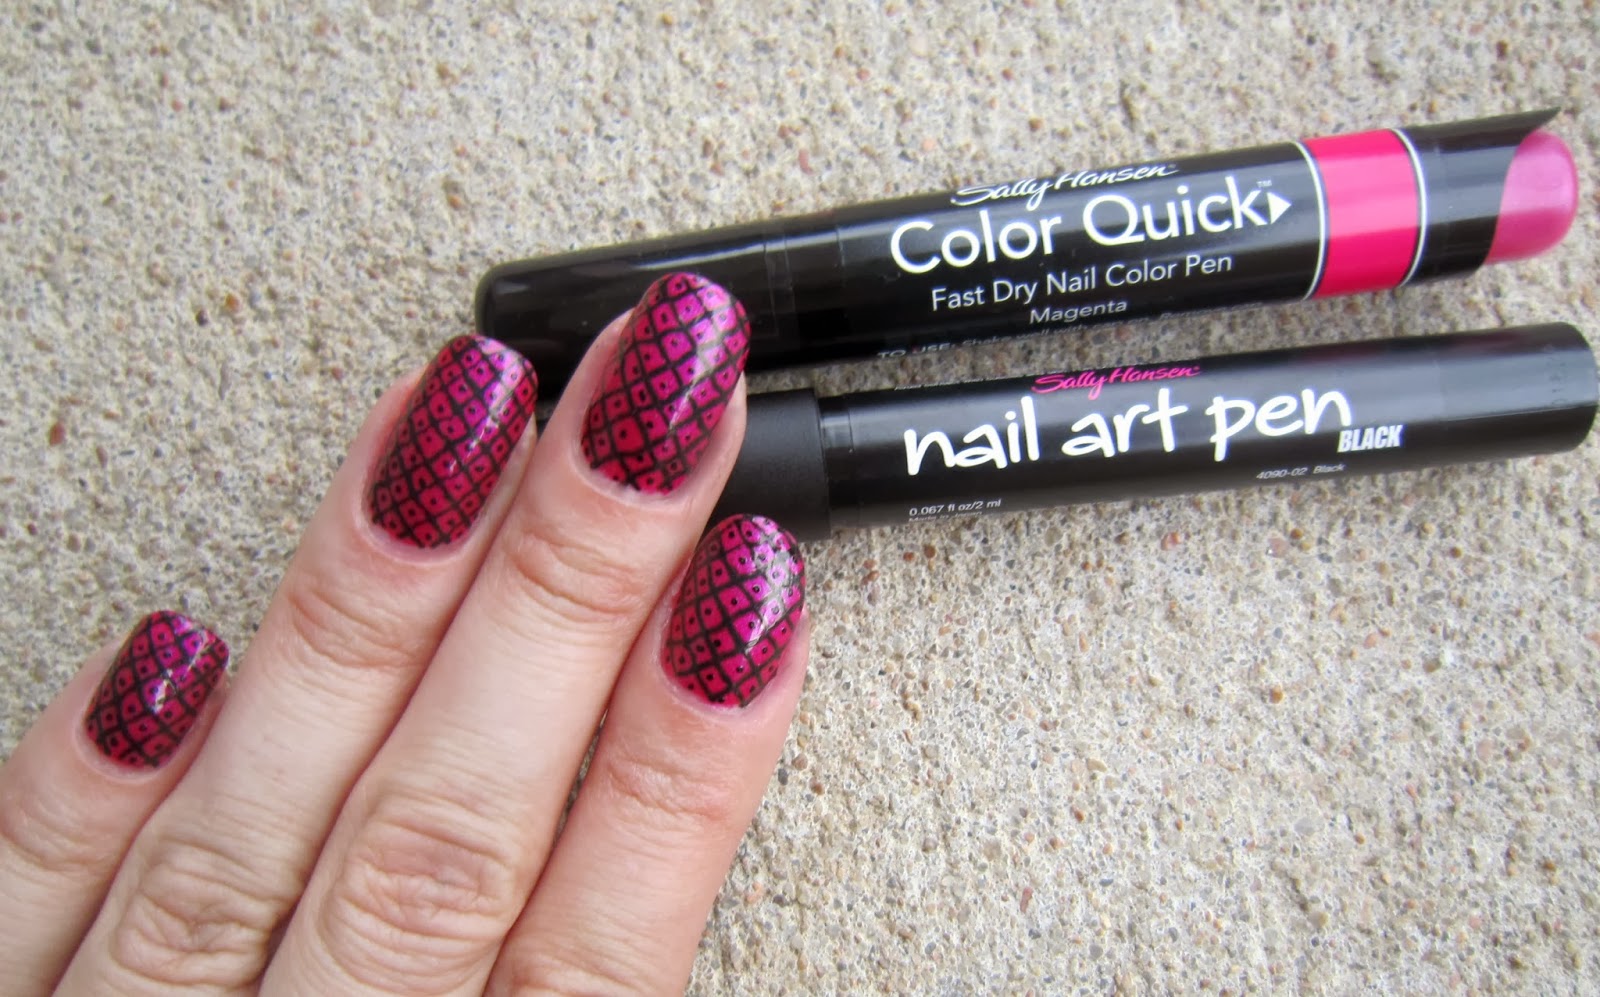 How to Use Sally Hansen Nail Art Pen on Skin - wide 8